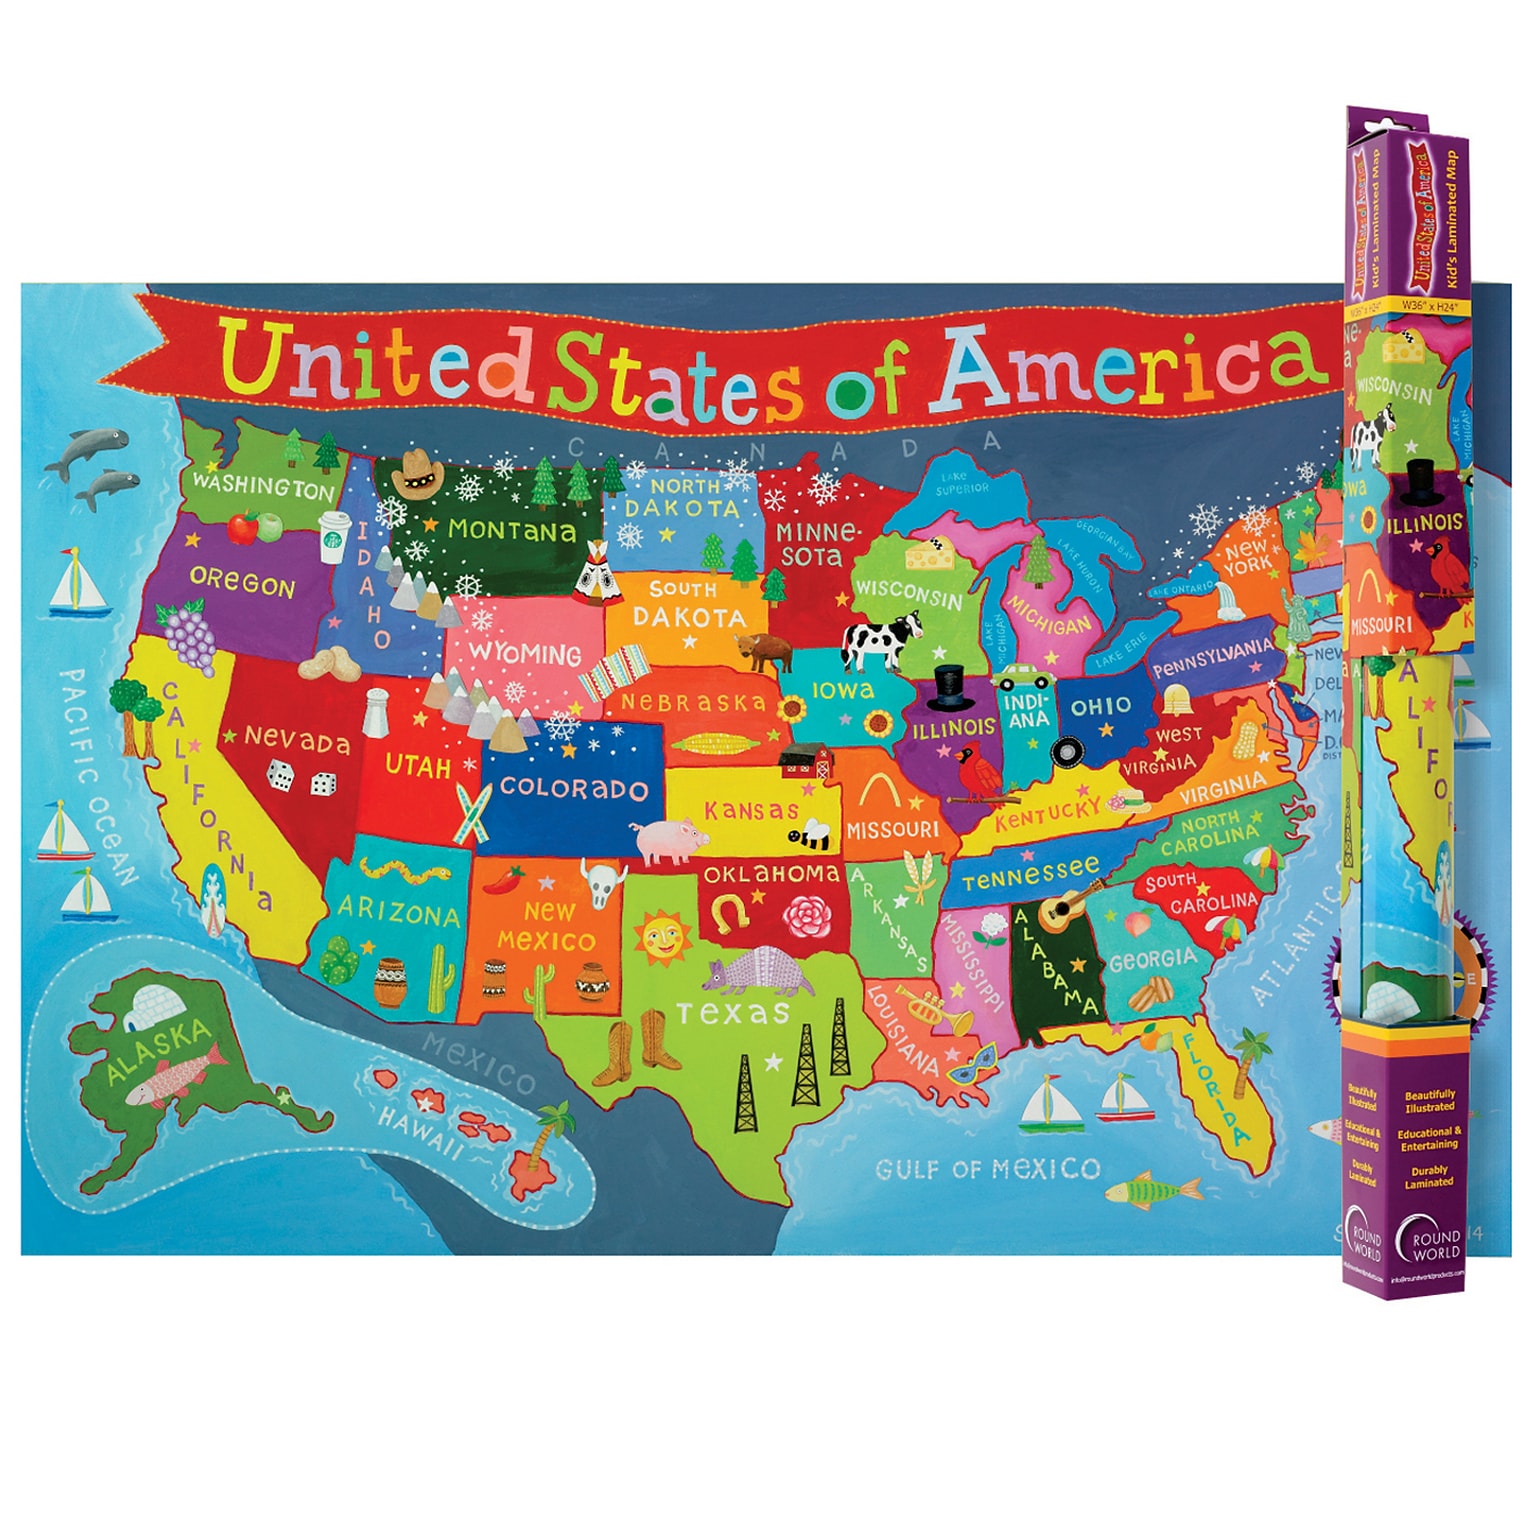 Round World Products United States Map for Kids, 24 x 36 (RWPKM02)